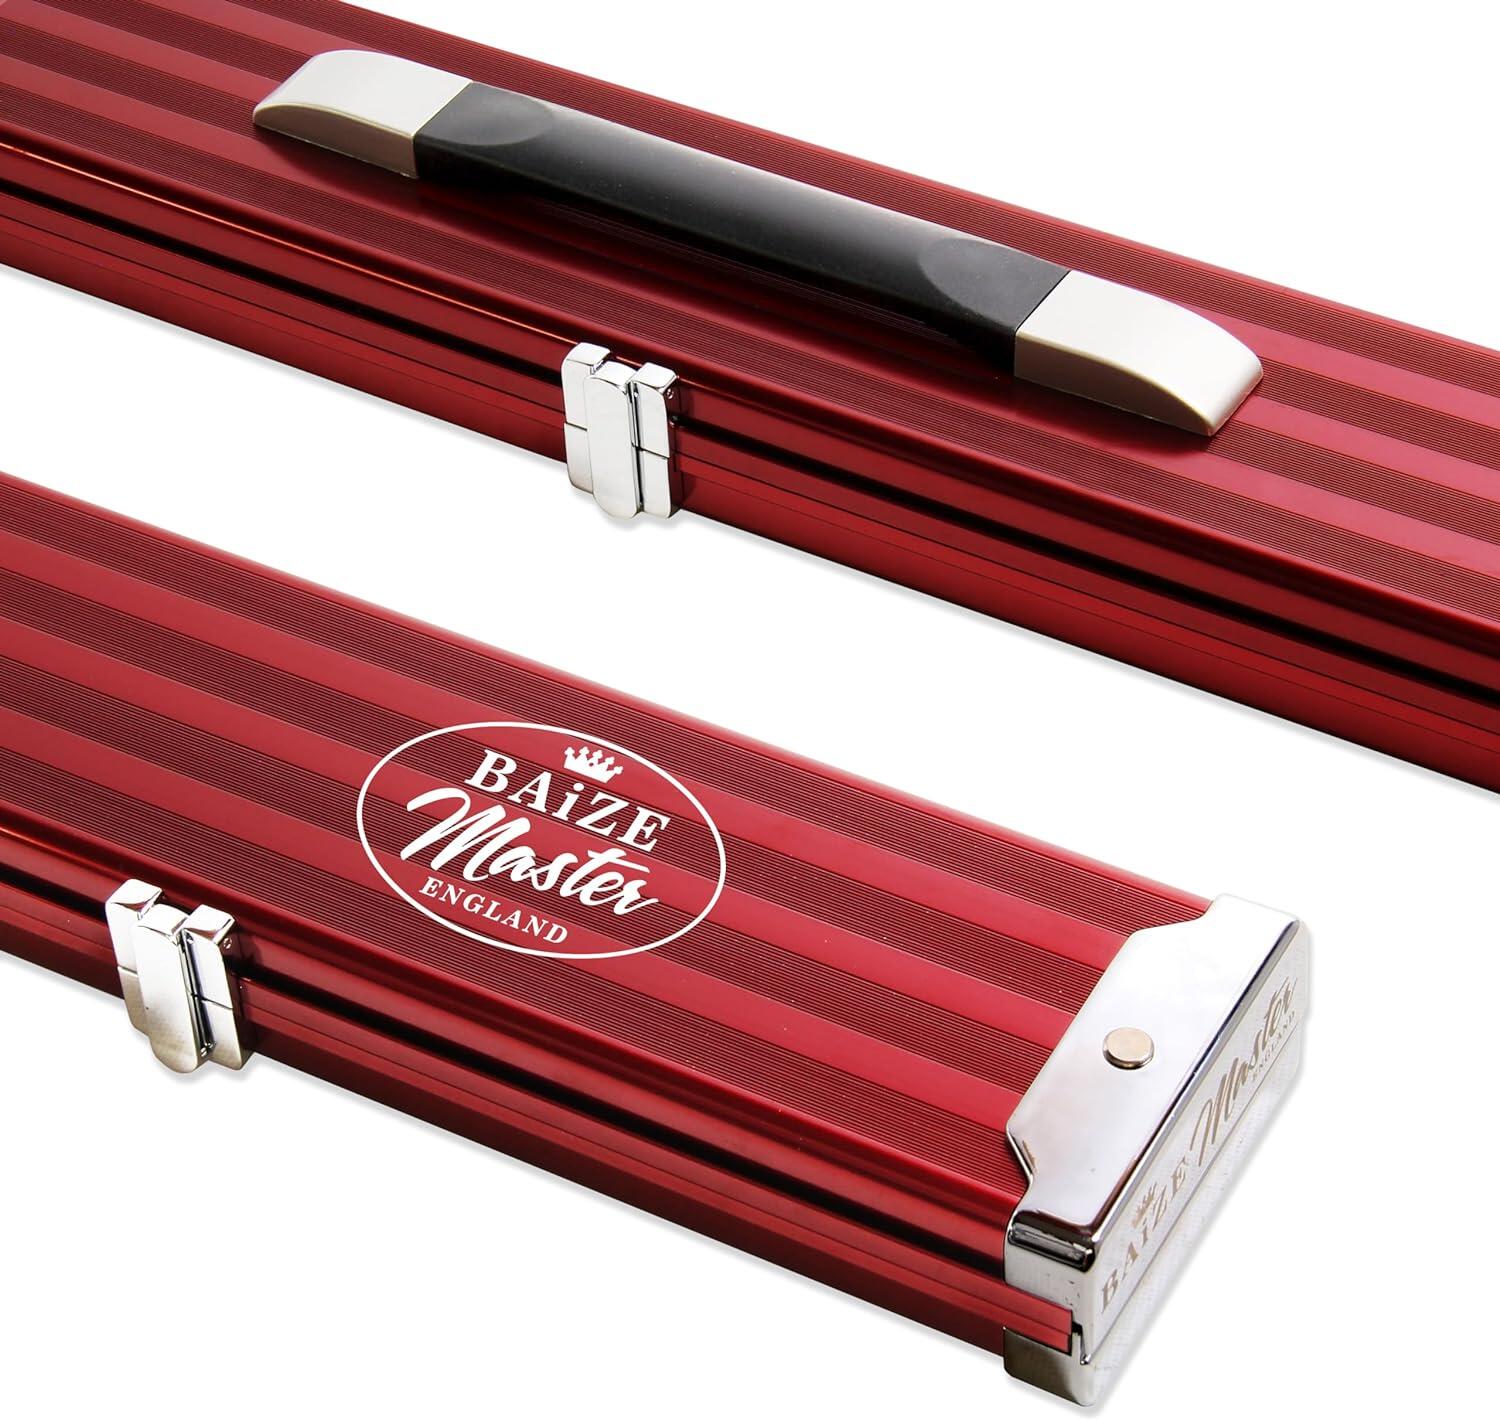 FUNKY CHALK Baize Master WIDE RED 3/4 PRO LINE Aluminium Snooker Pool Cue Case - 2 Cues